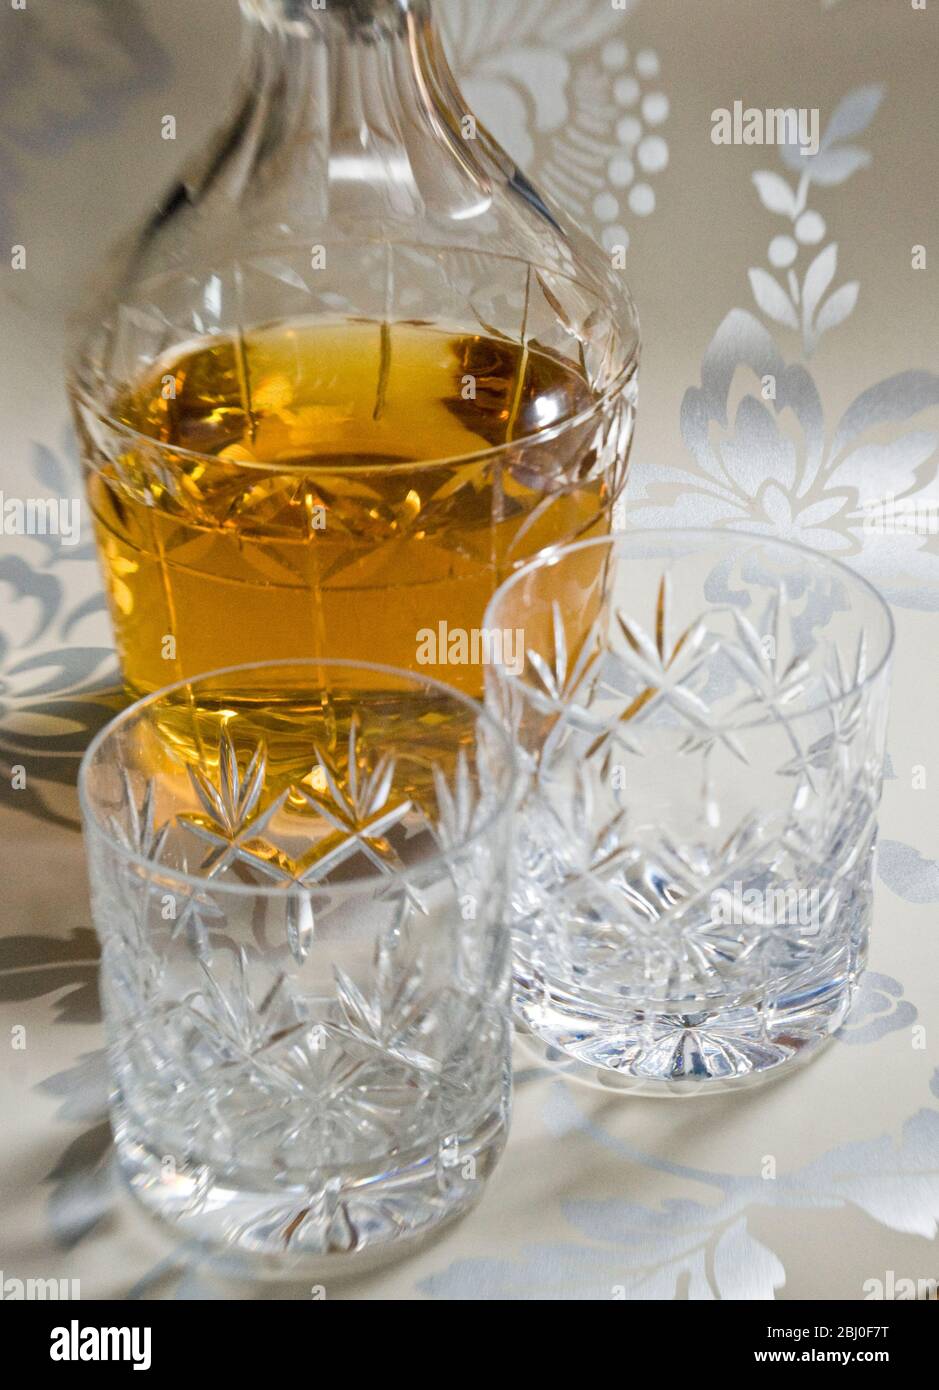 Scotch whisky on ice in cut lead crystal glasses on decorative silver surface, with decanter. - Stock Photo